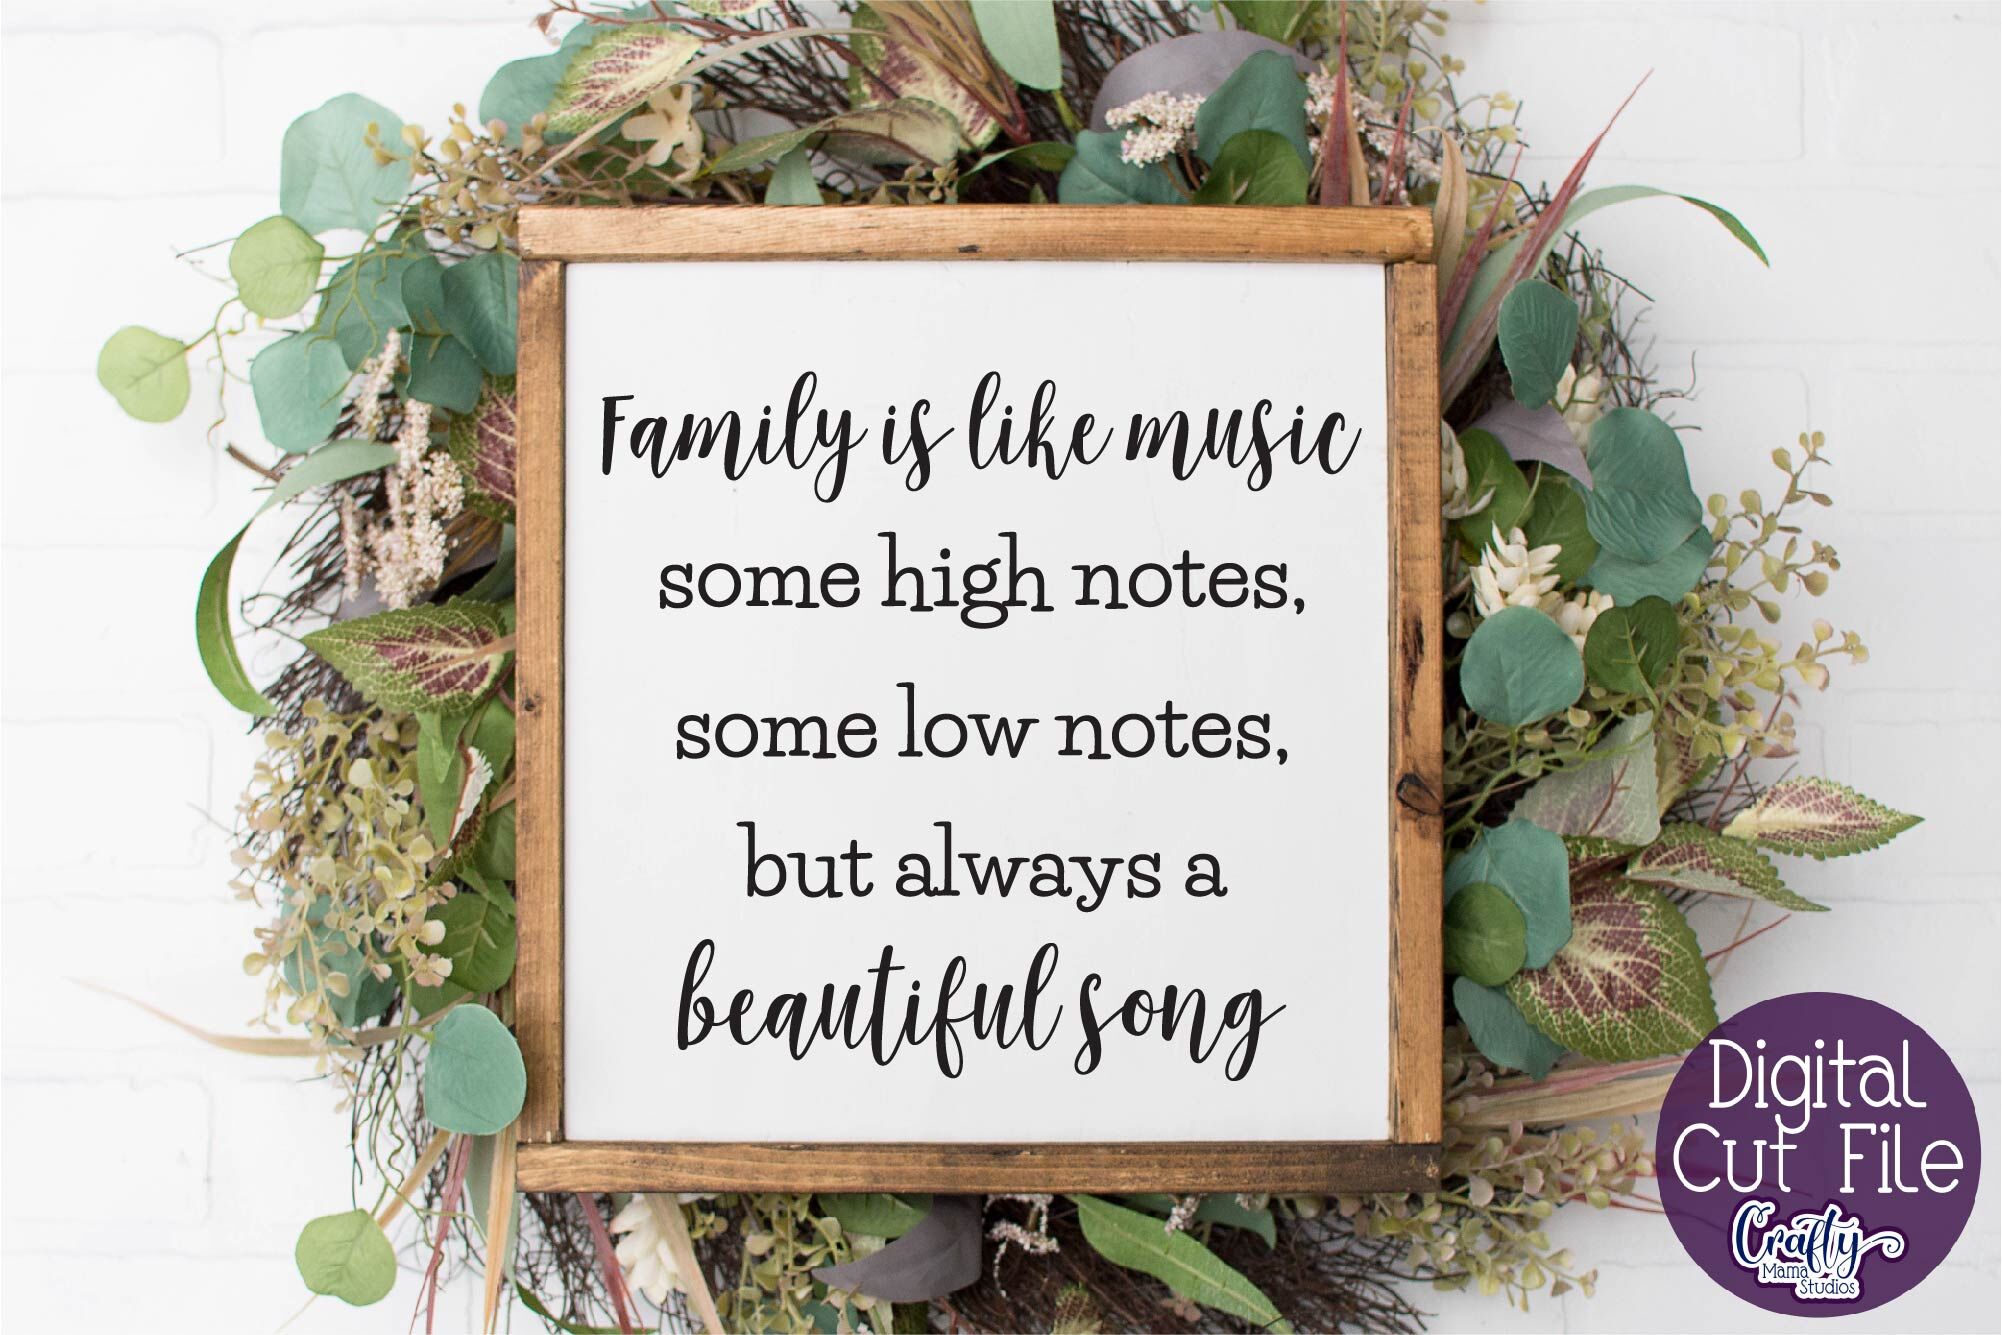 Download Farmhouse Svg Home Sign Family Is Like Music Music Quote By Crafty Mama Studios Thehungryjpeg Com